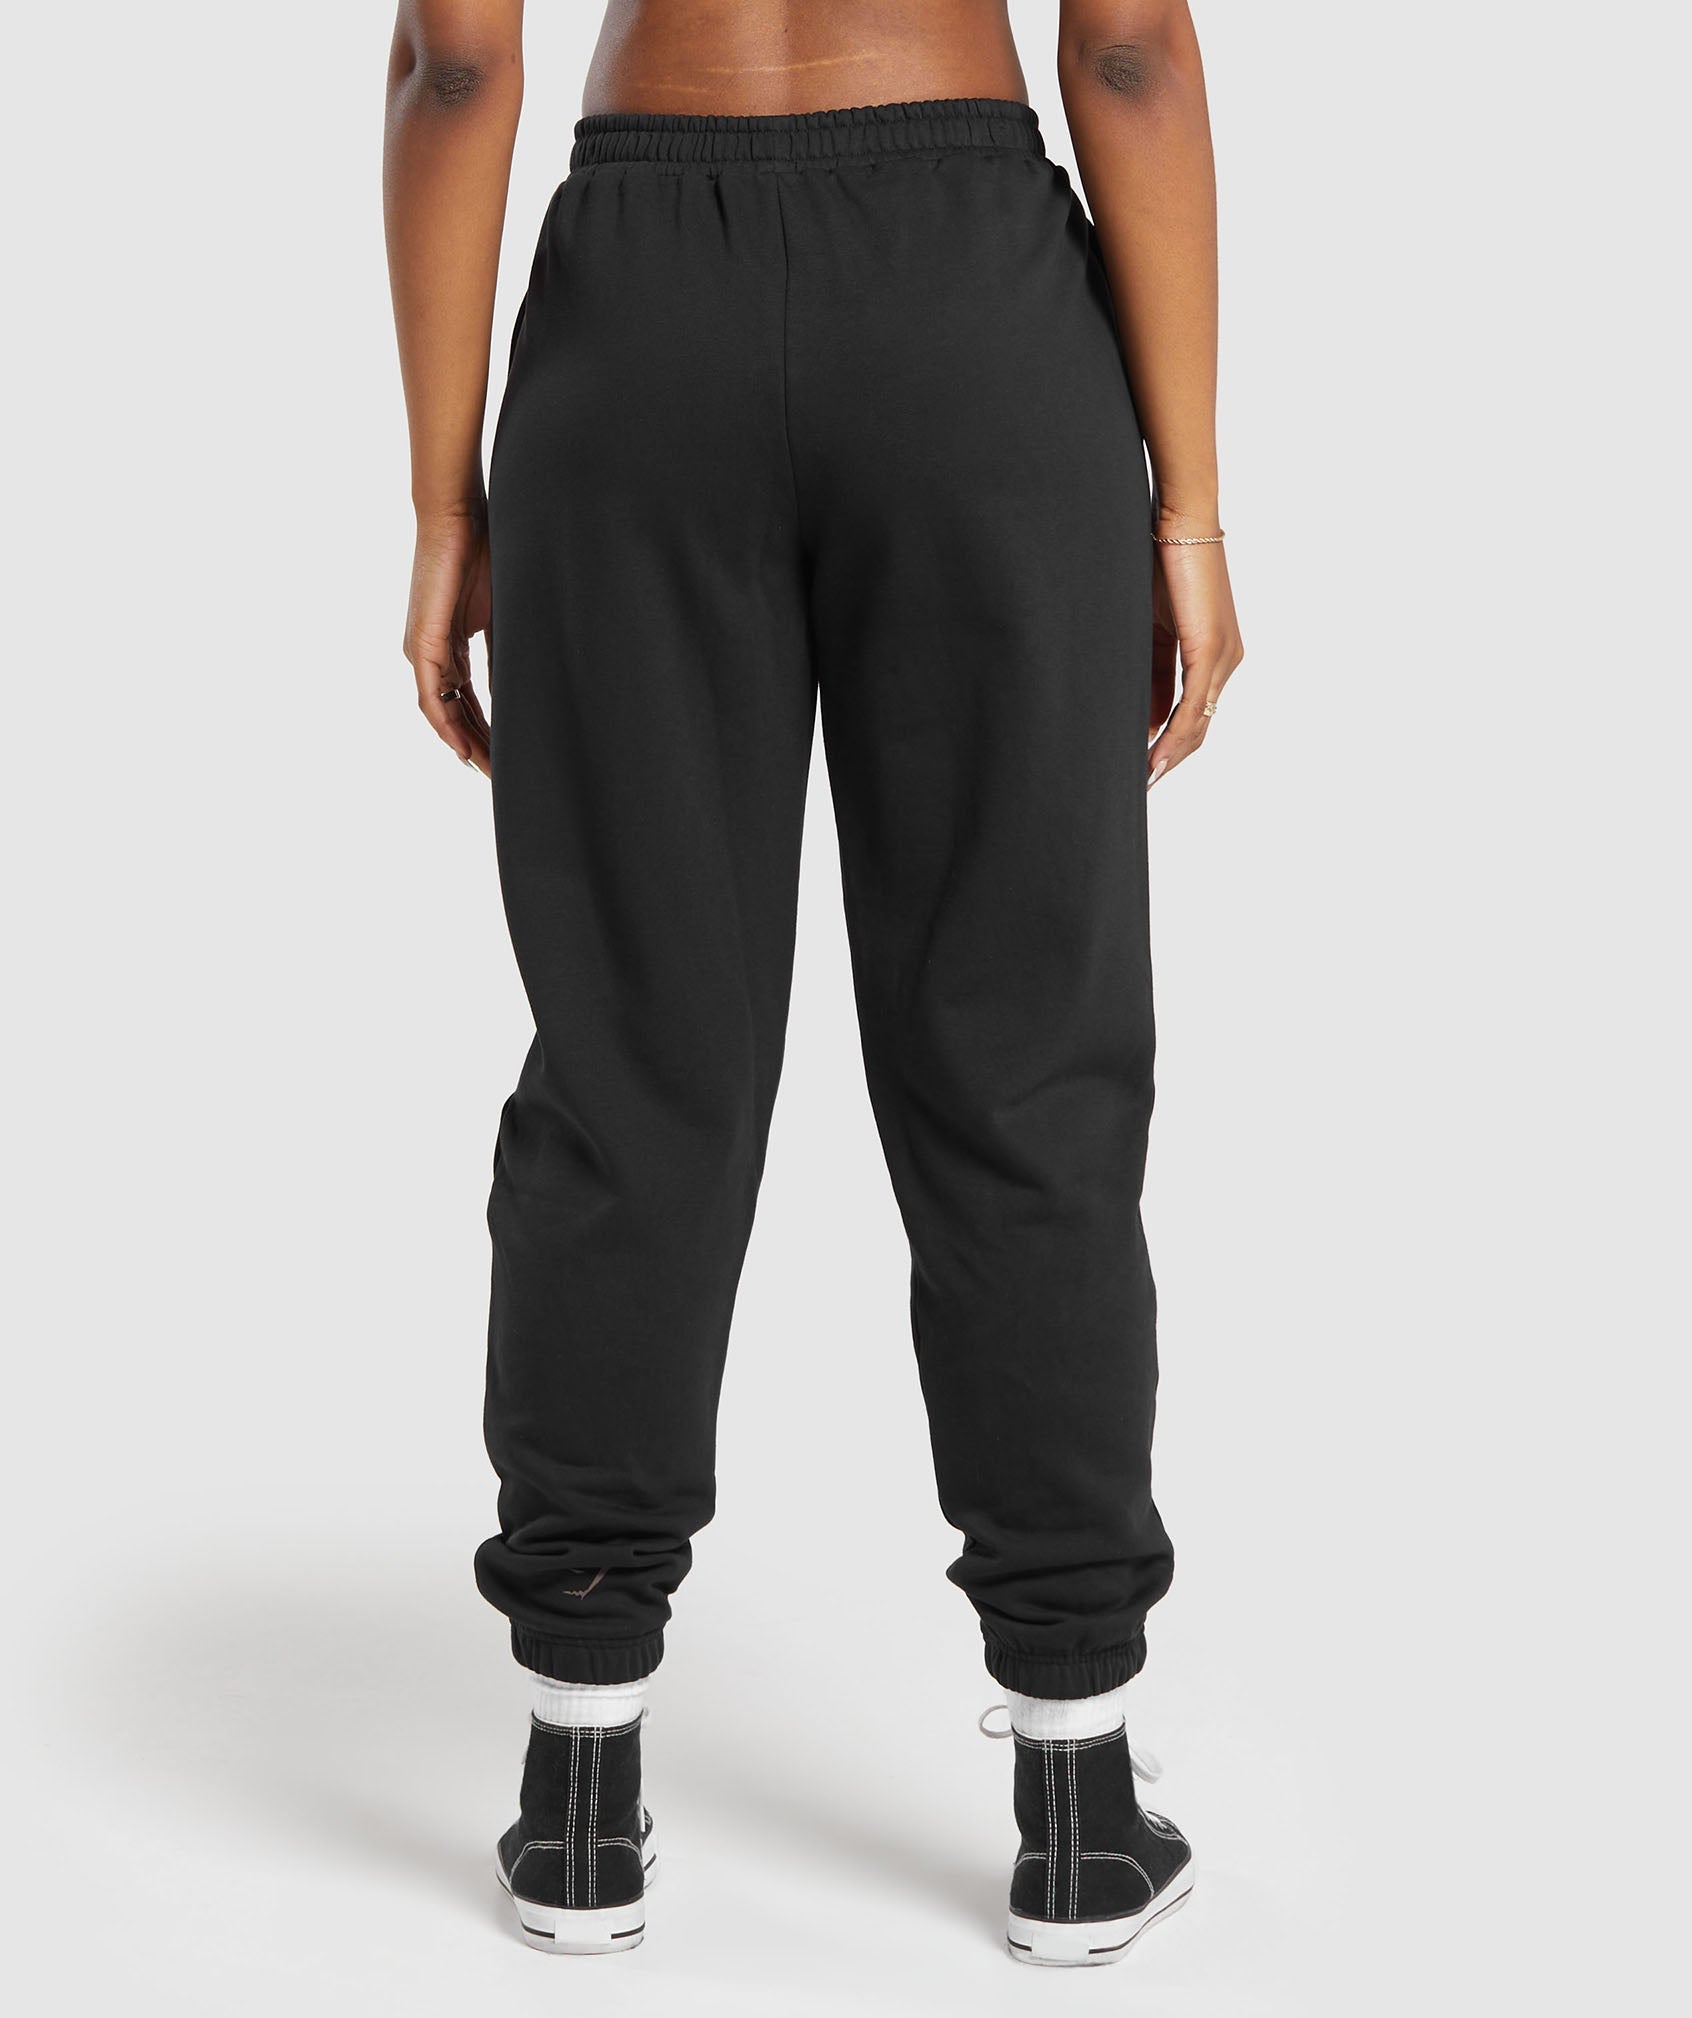 Built Graphic Joggers in Black - view 3